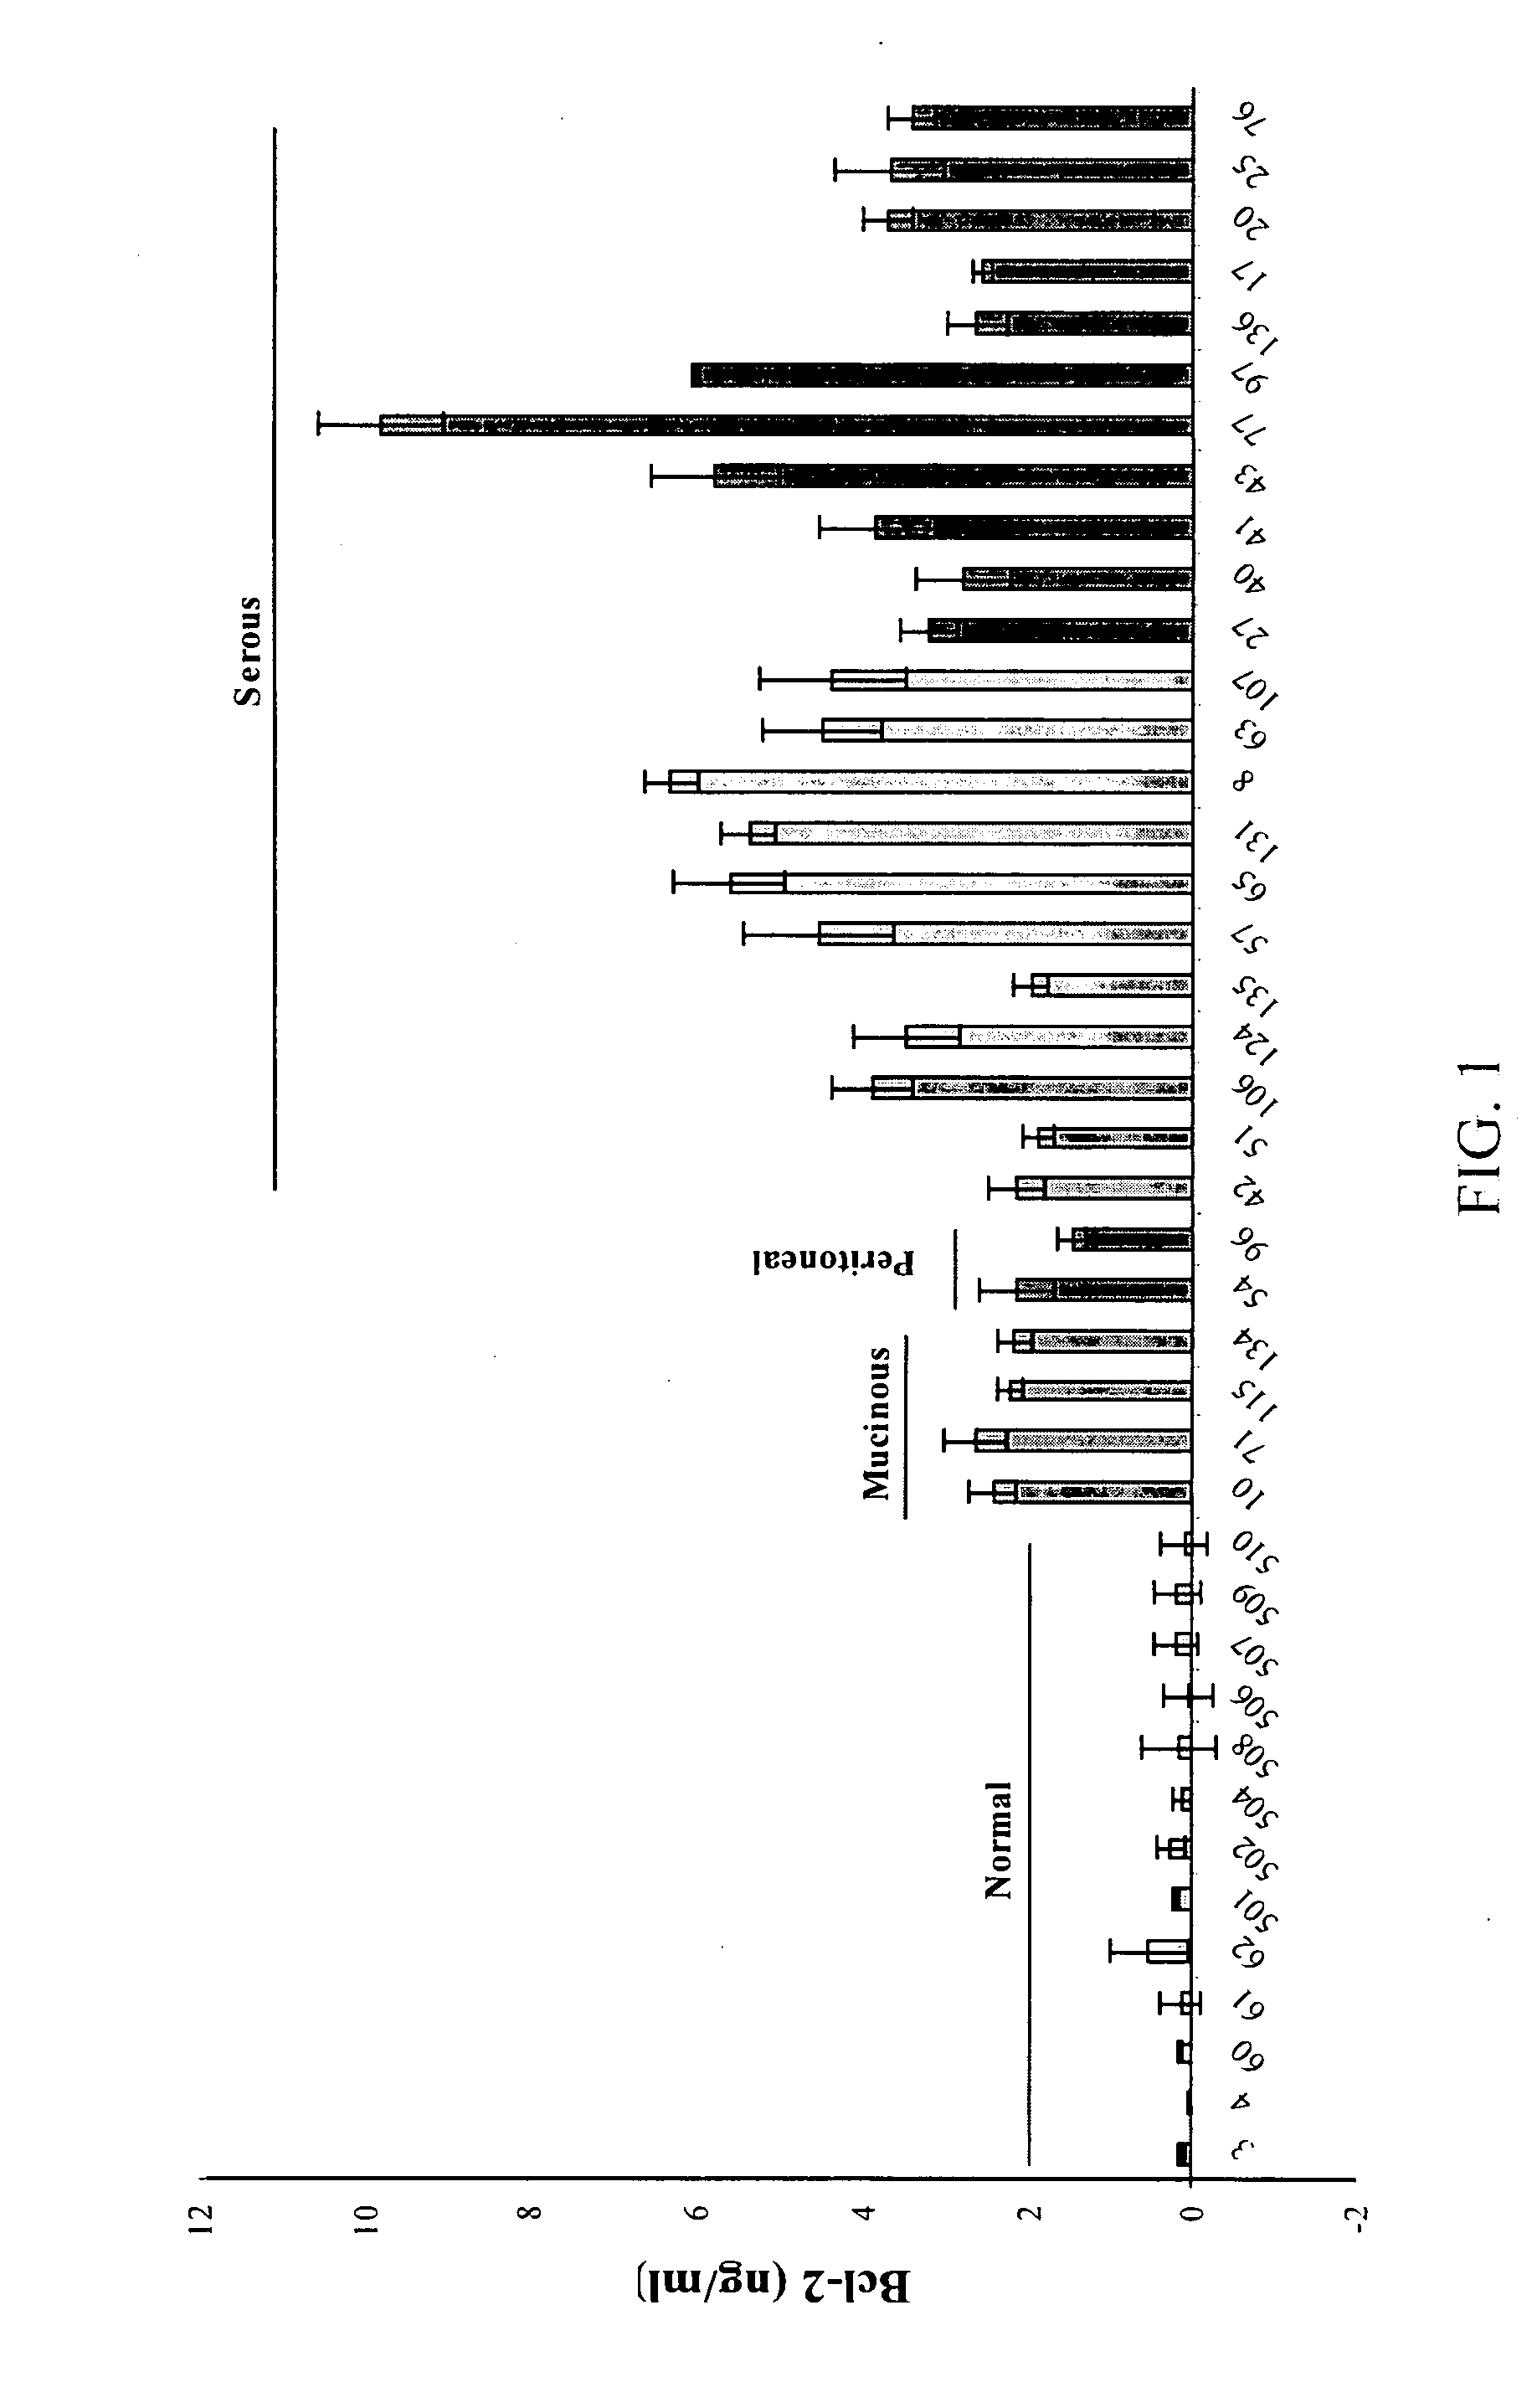 Detection of cancer by elevated levels of BCL-2